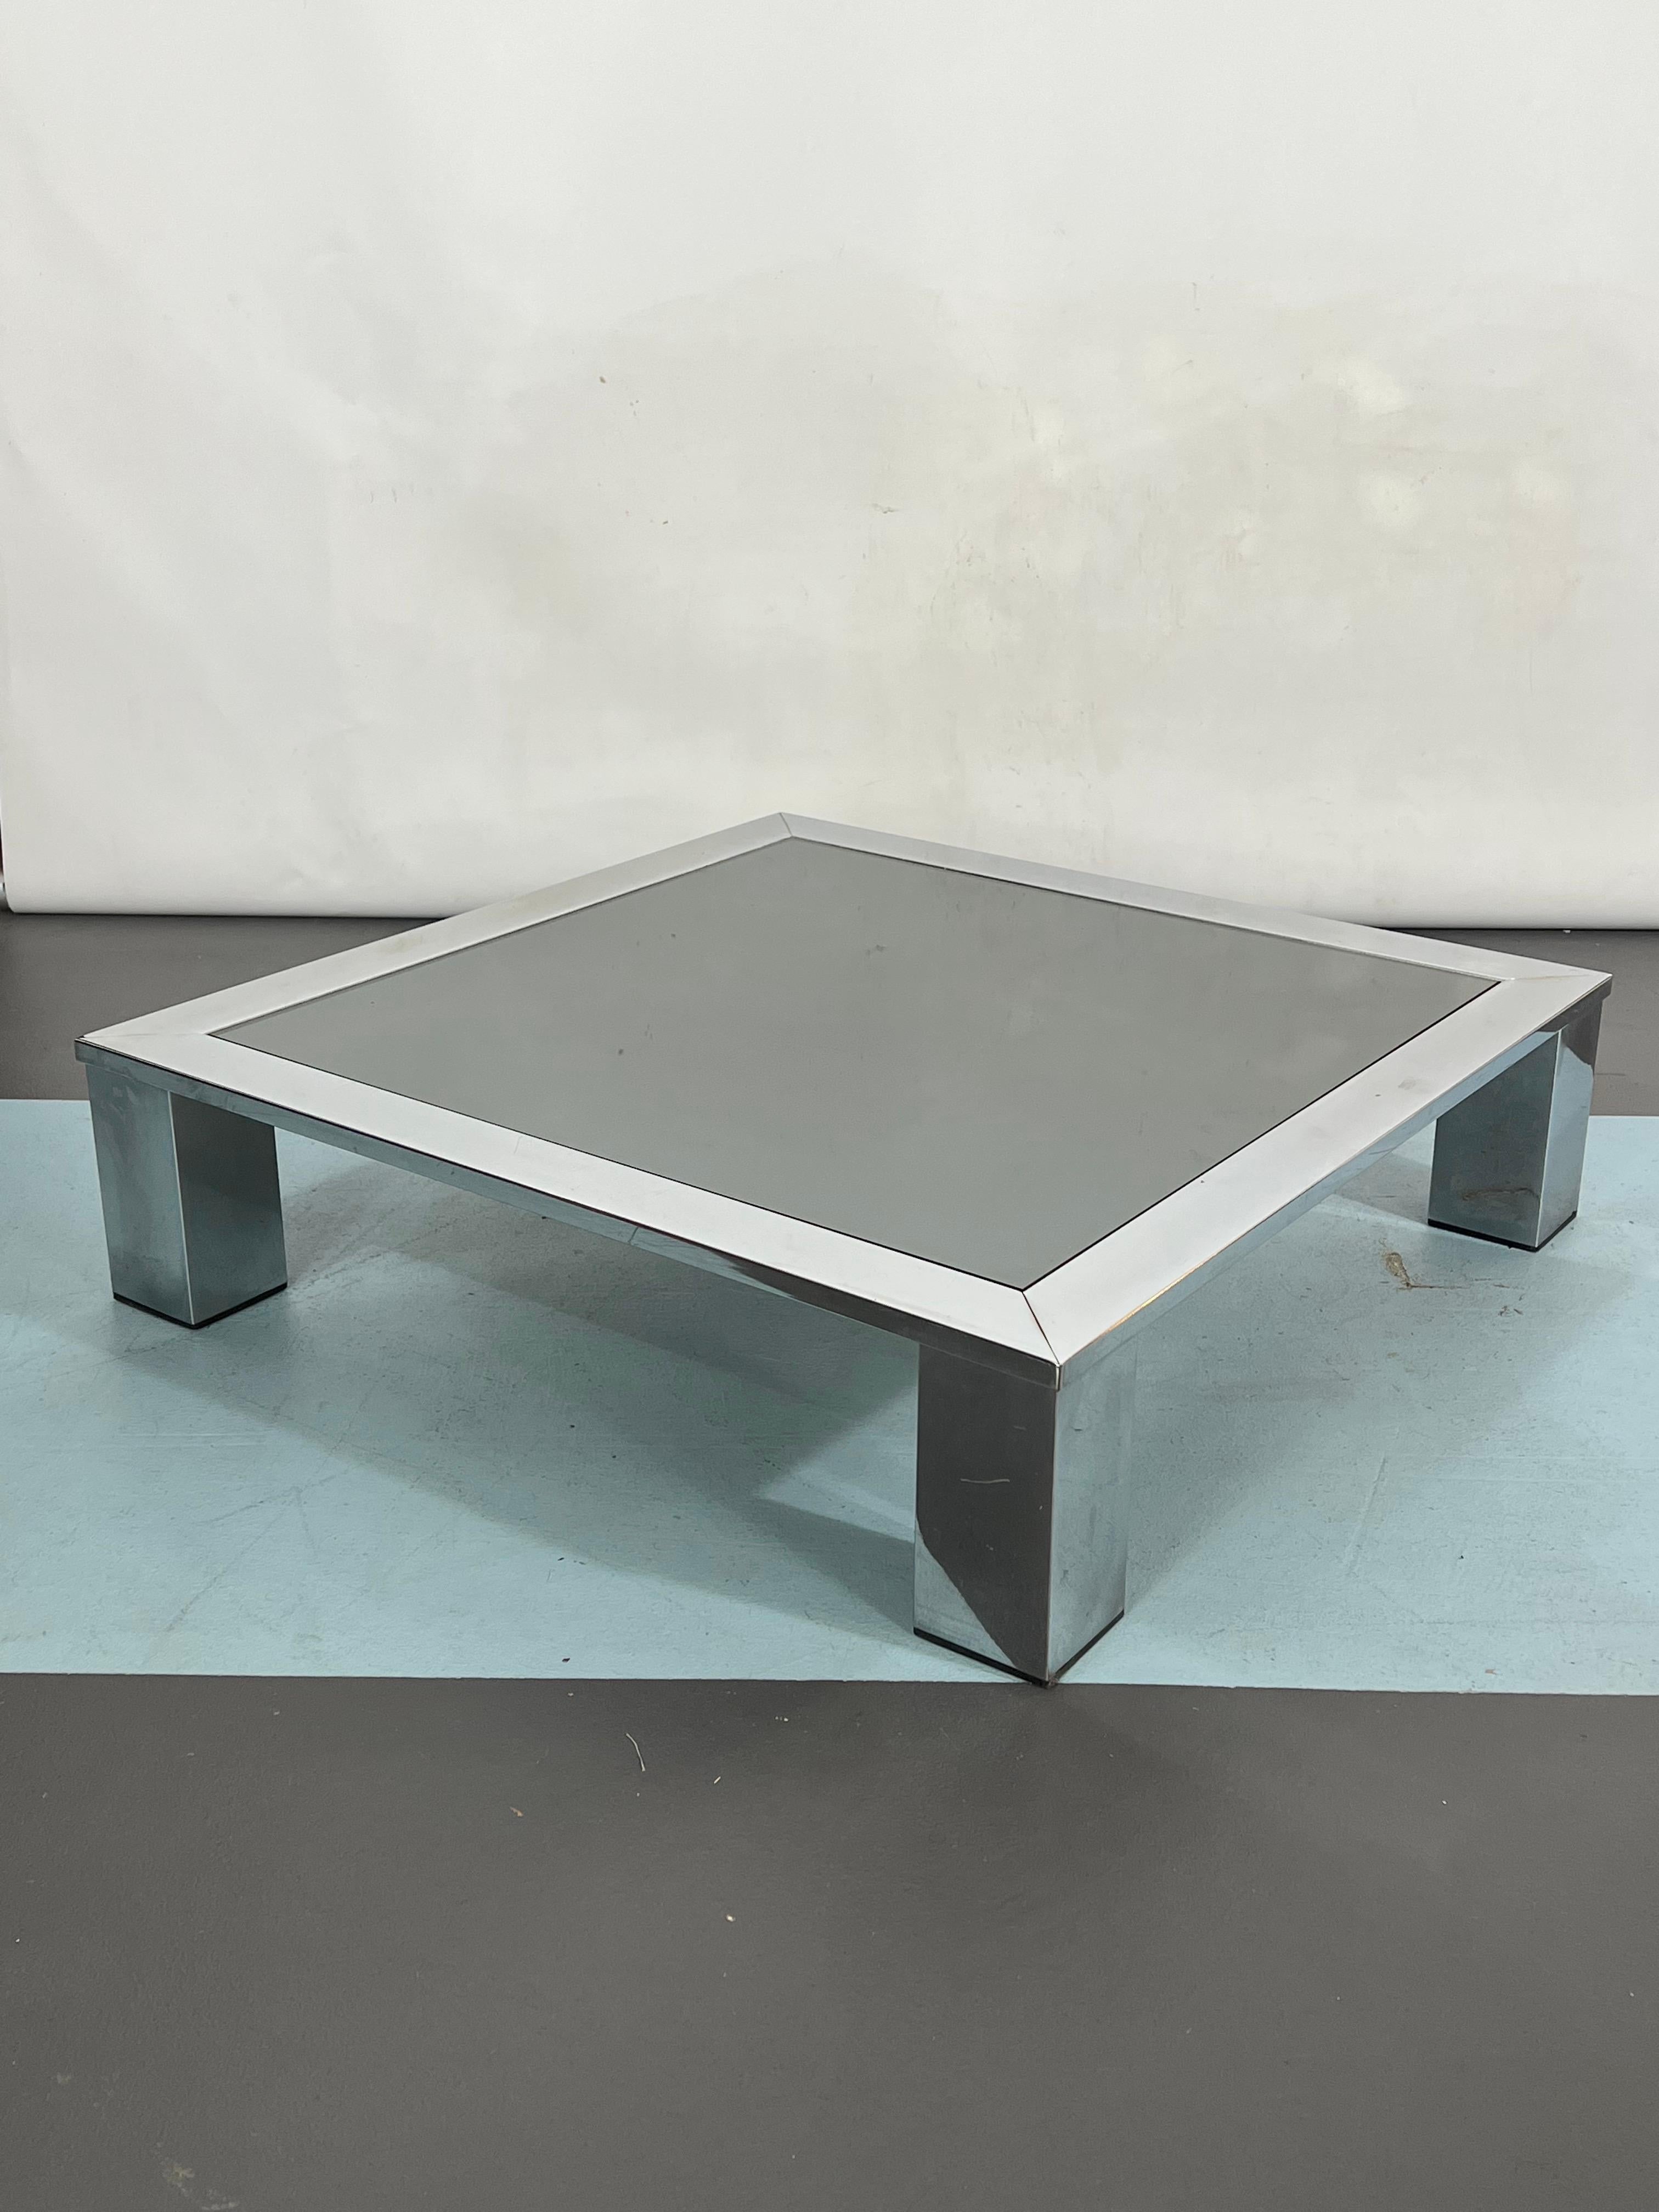 20th Century Mid-Century Chrome and Mirror Glass Side Table Attributed to Saporiti, Italy 70s For Sale